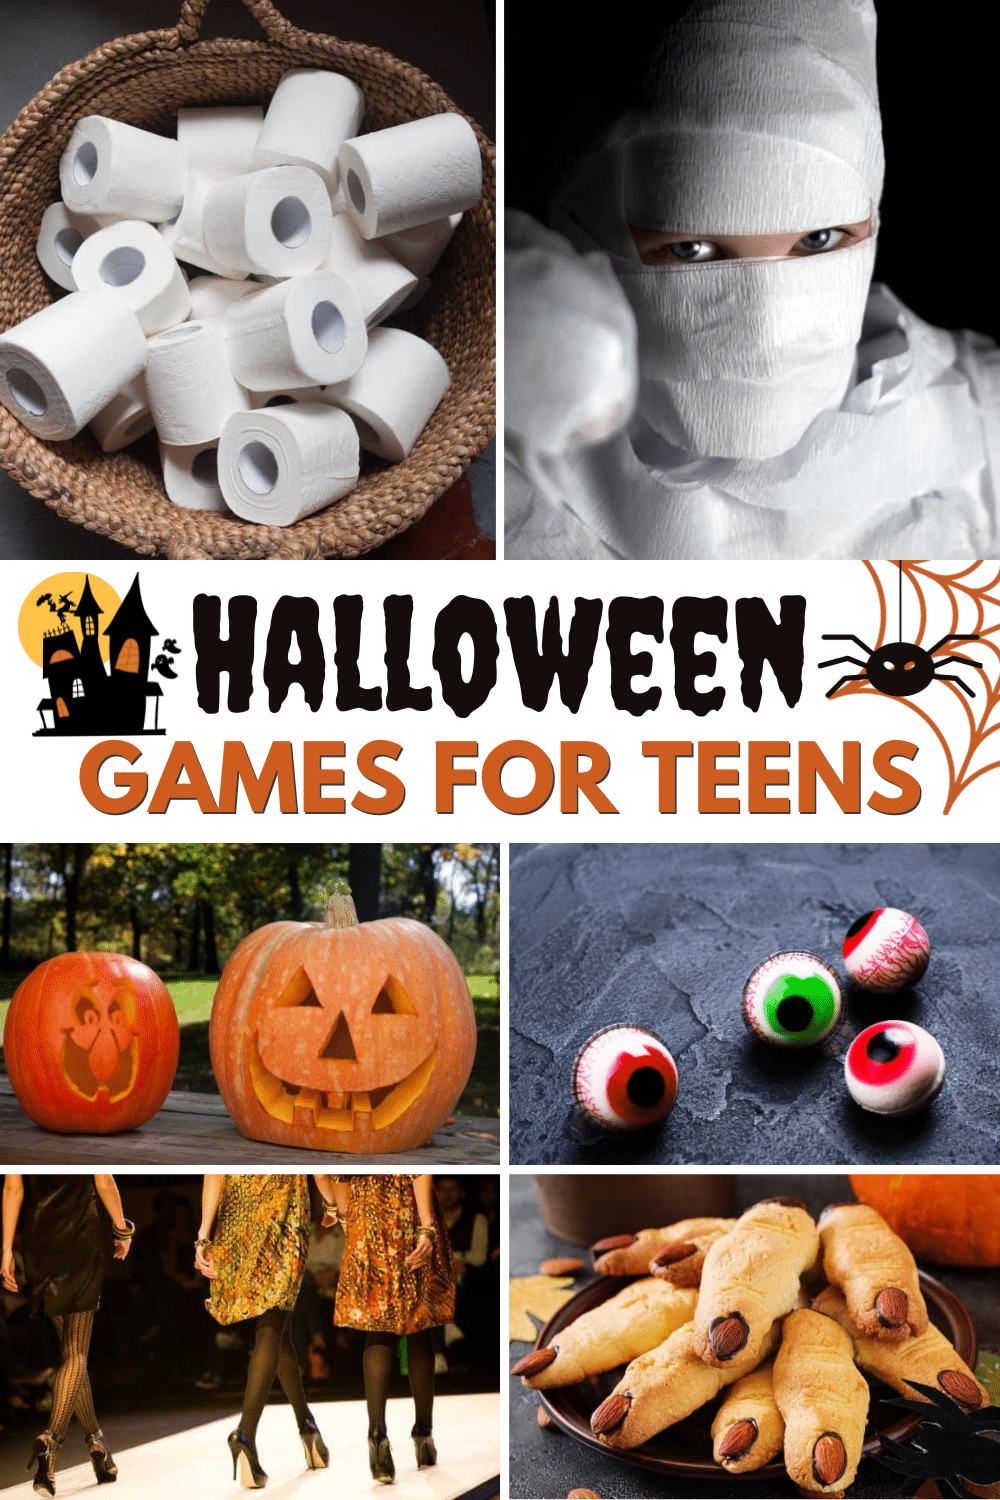 Halloween games perfect for teens.